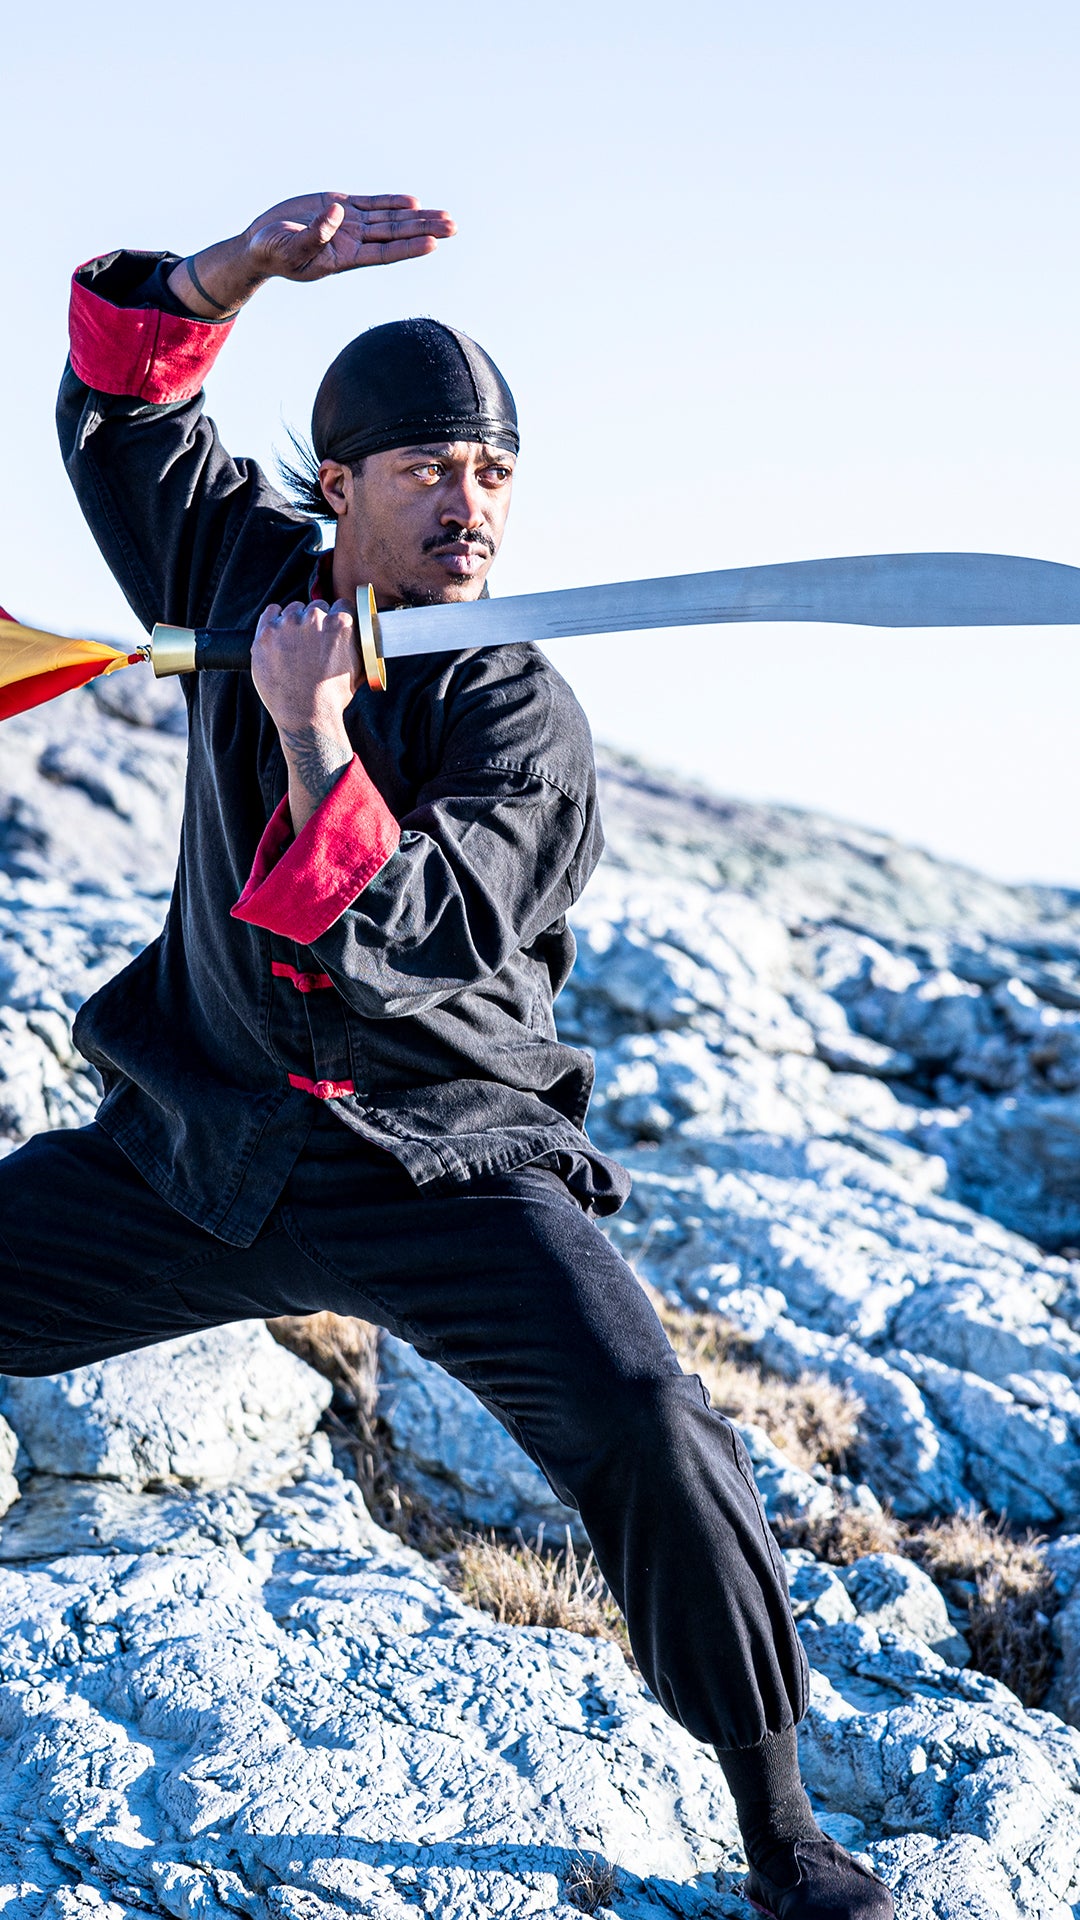 Rob Campbell with sword and in Kung Fu uniform on rocks near beach